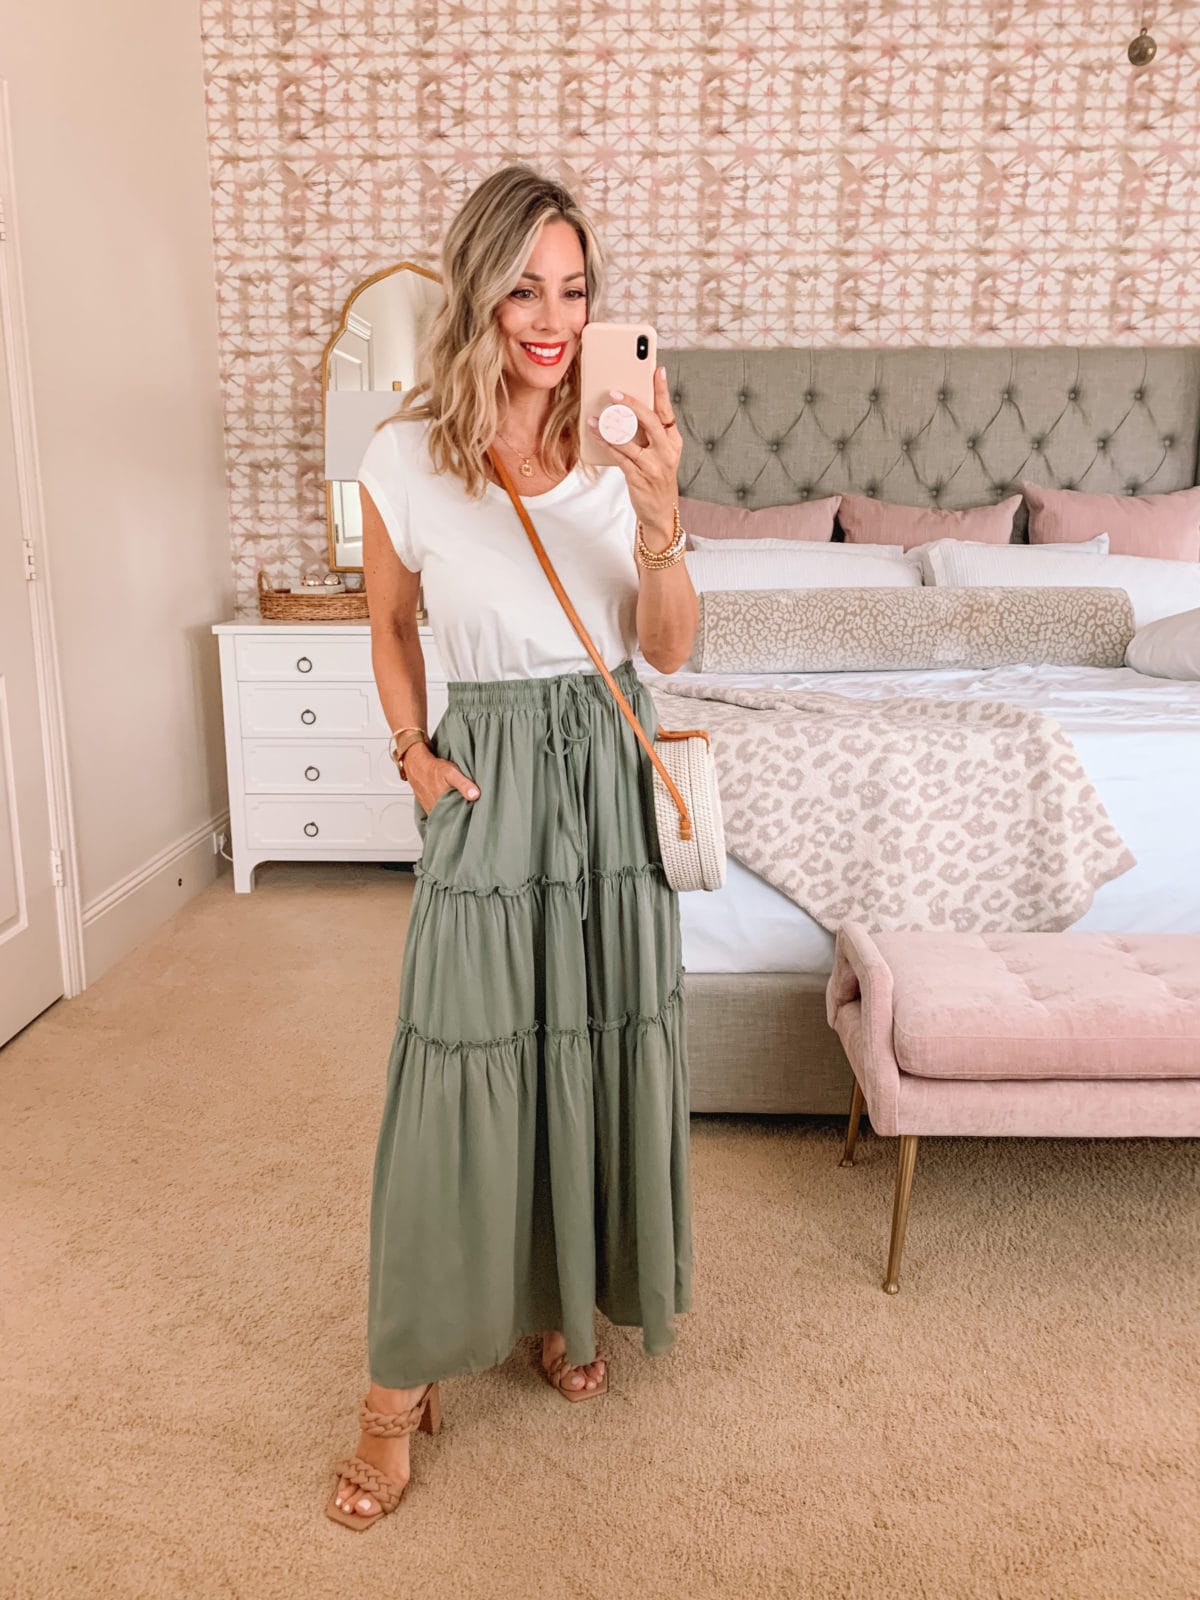 Amazon Fashion Faves, White Tee and Maxi Skirt with Sandals and Crossbody 